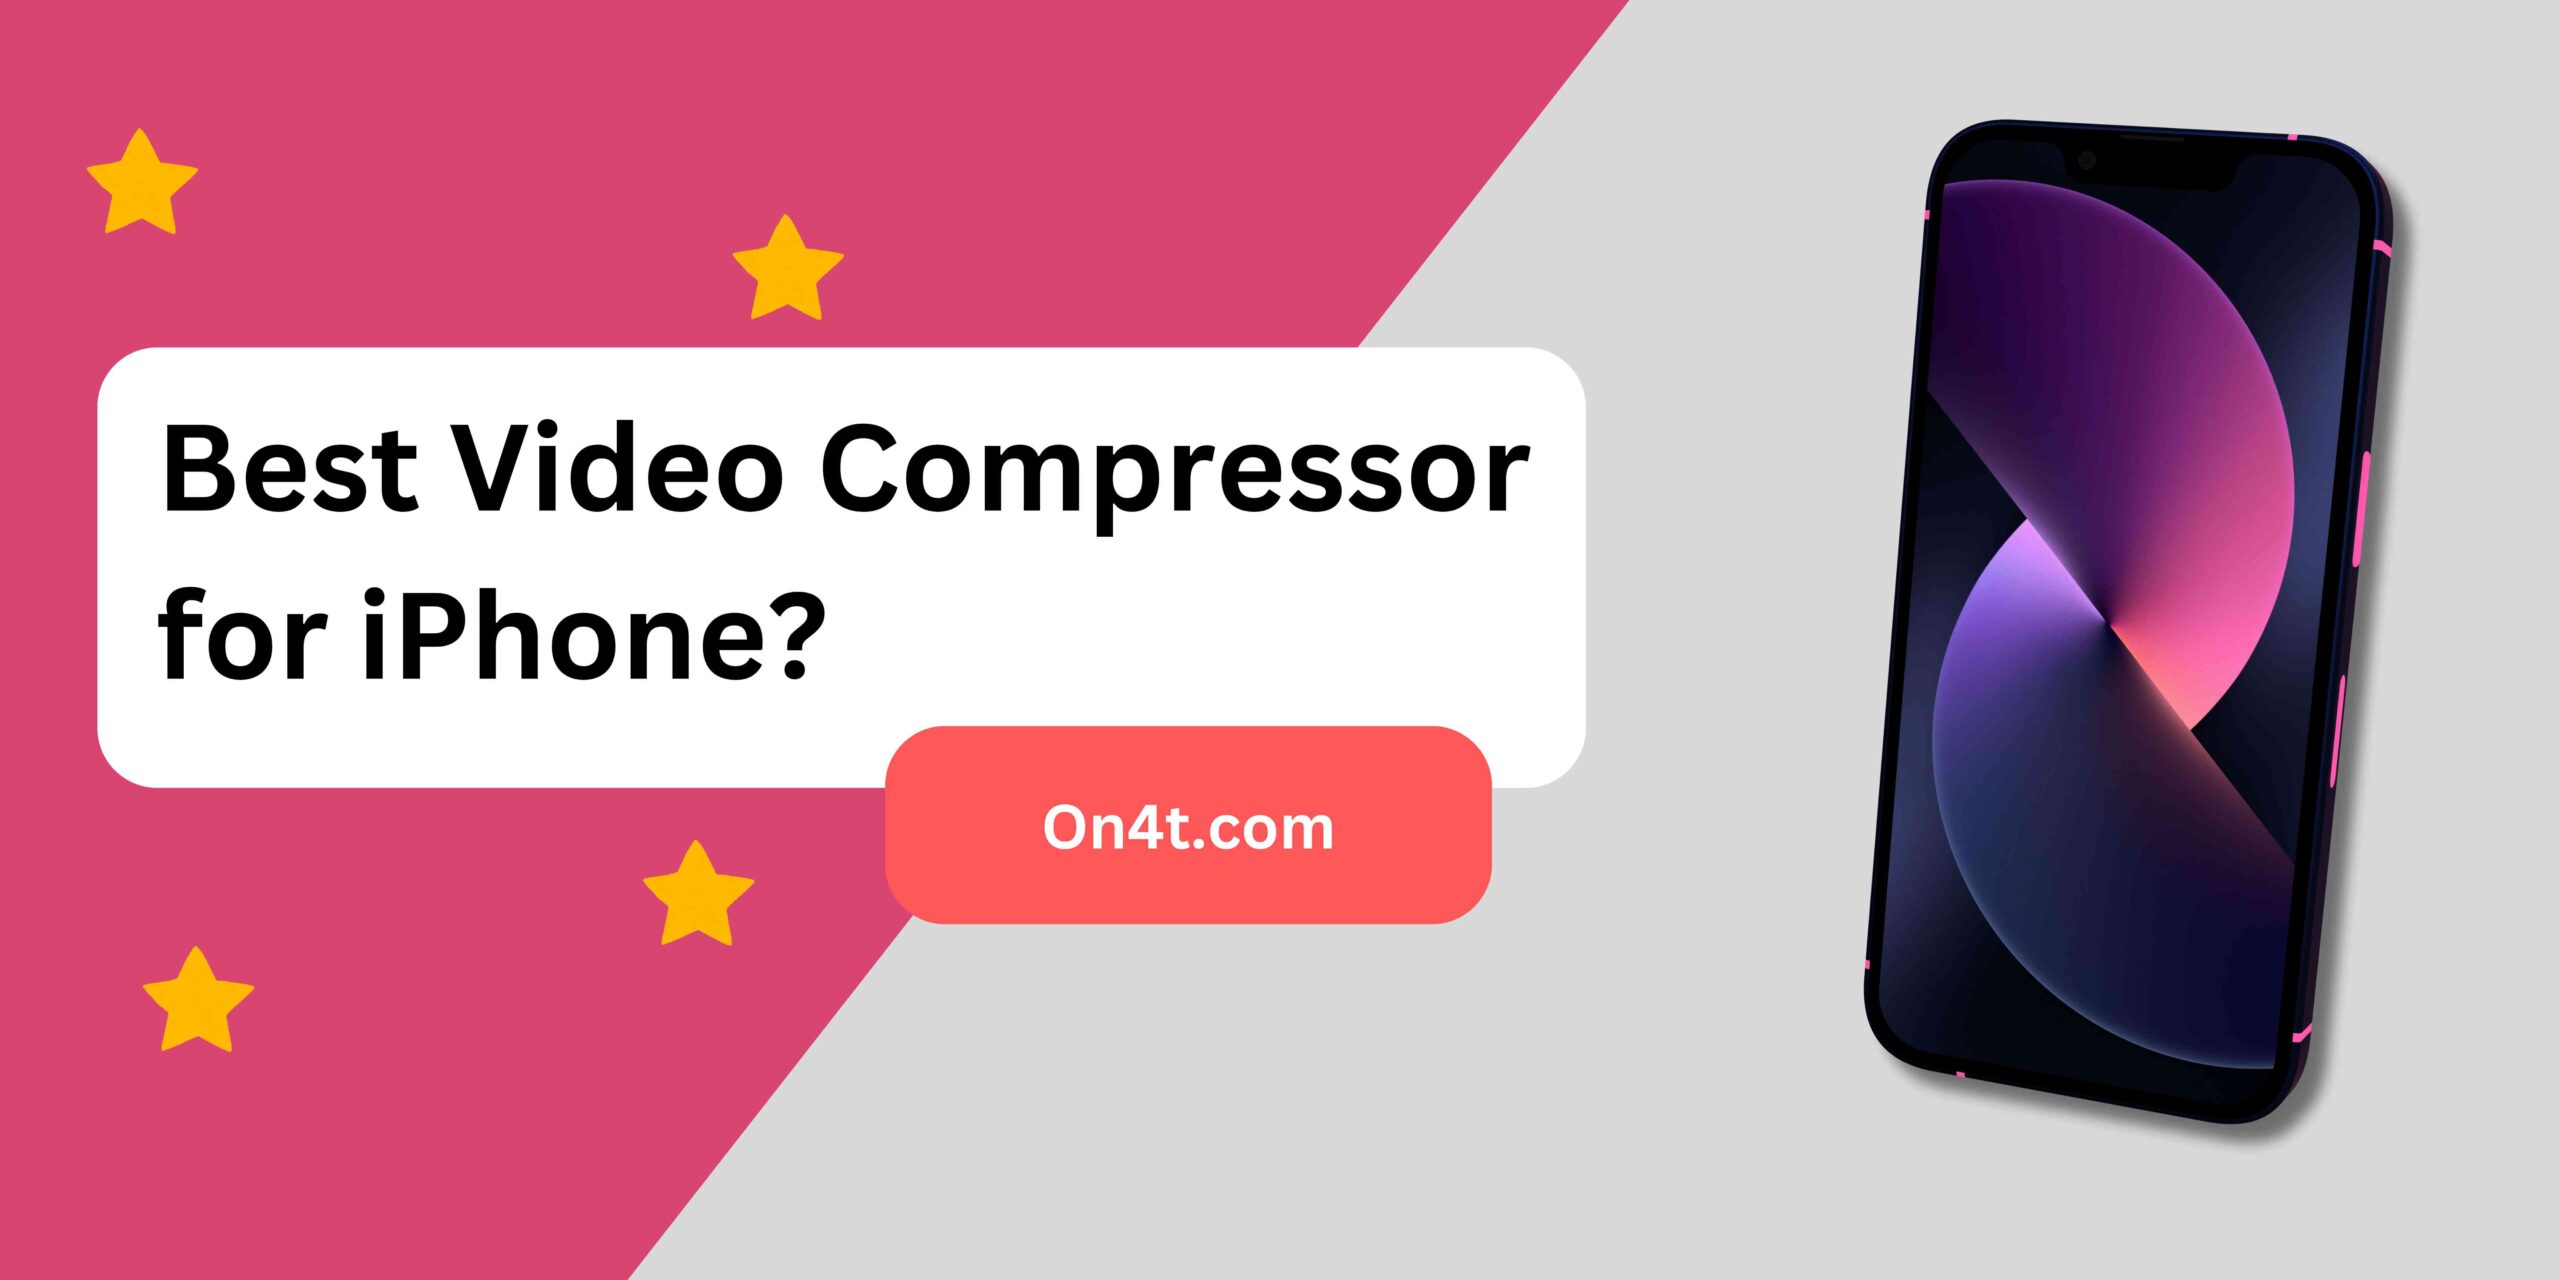 Best Video Compressor for iPhone?